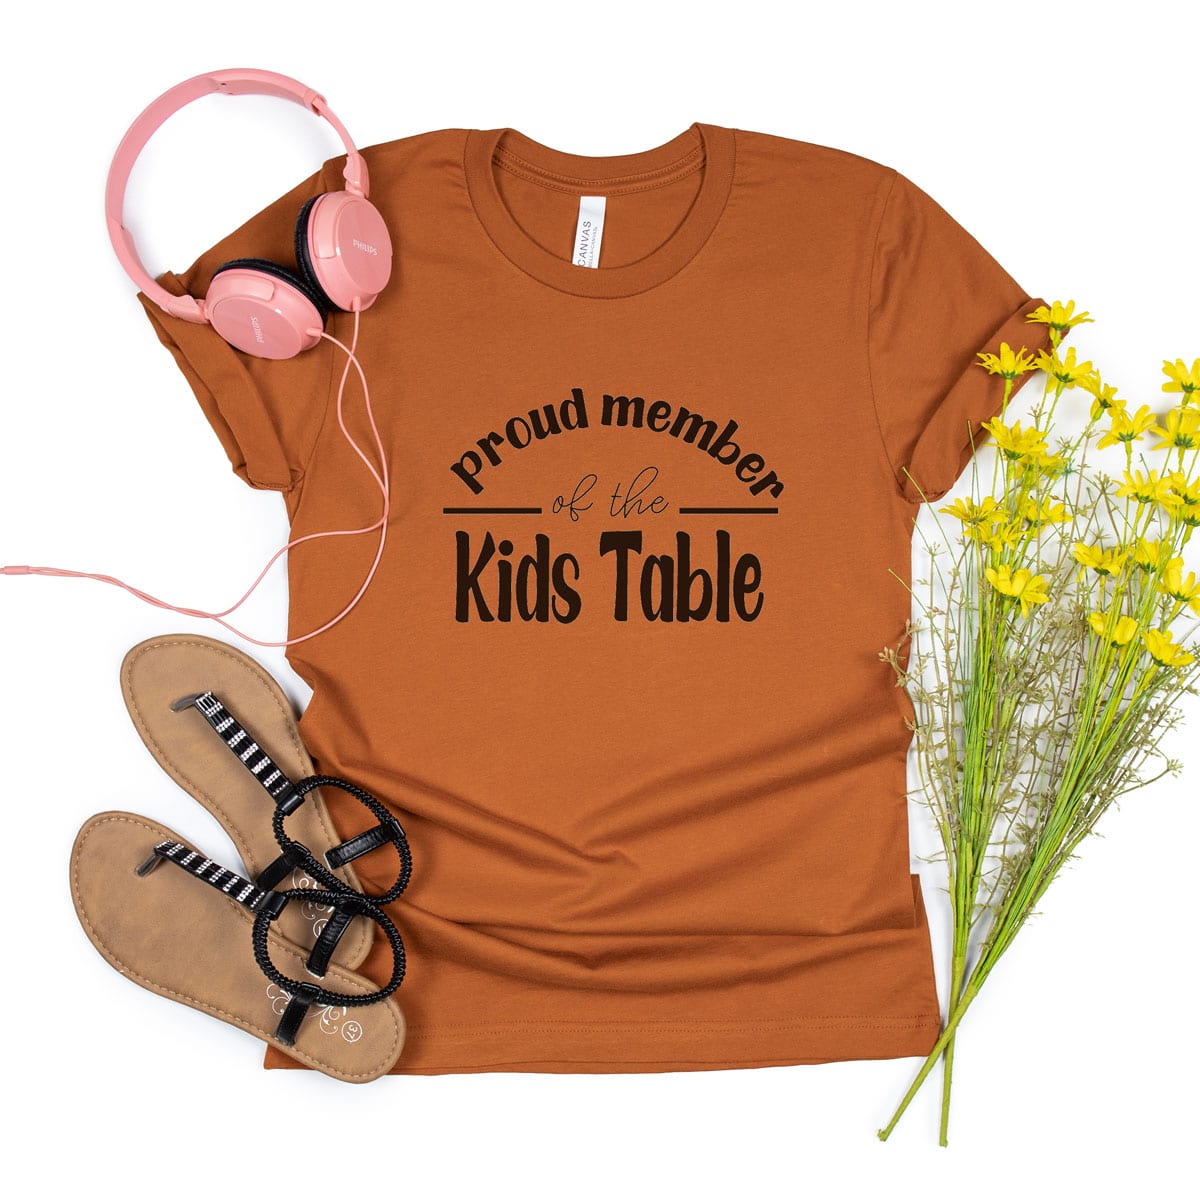 Proud Member of the Kids Table by Life Sew Savory